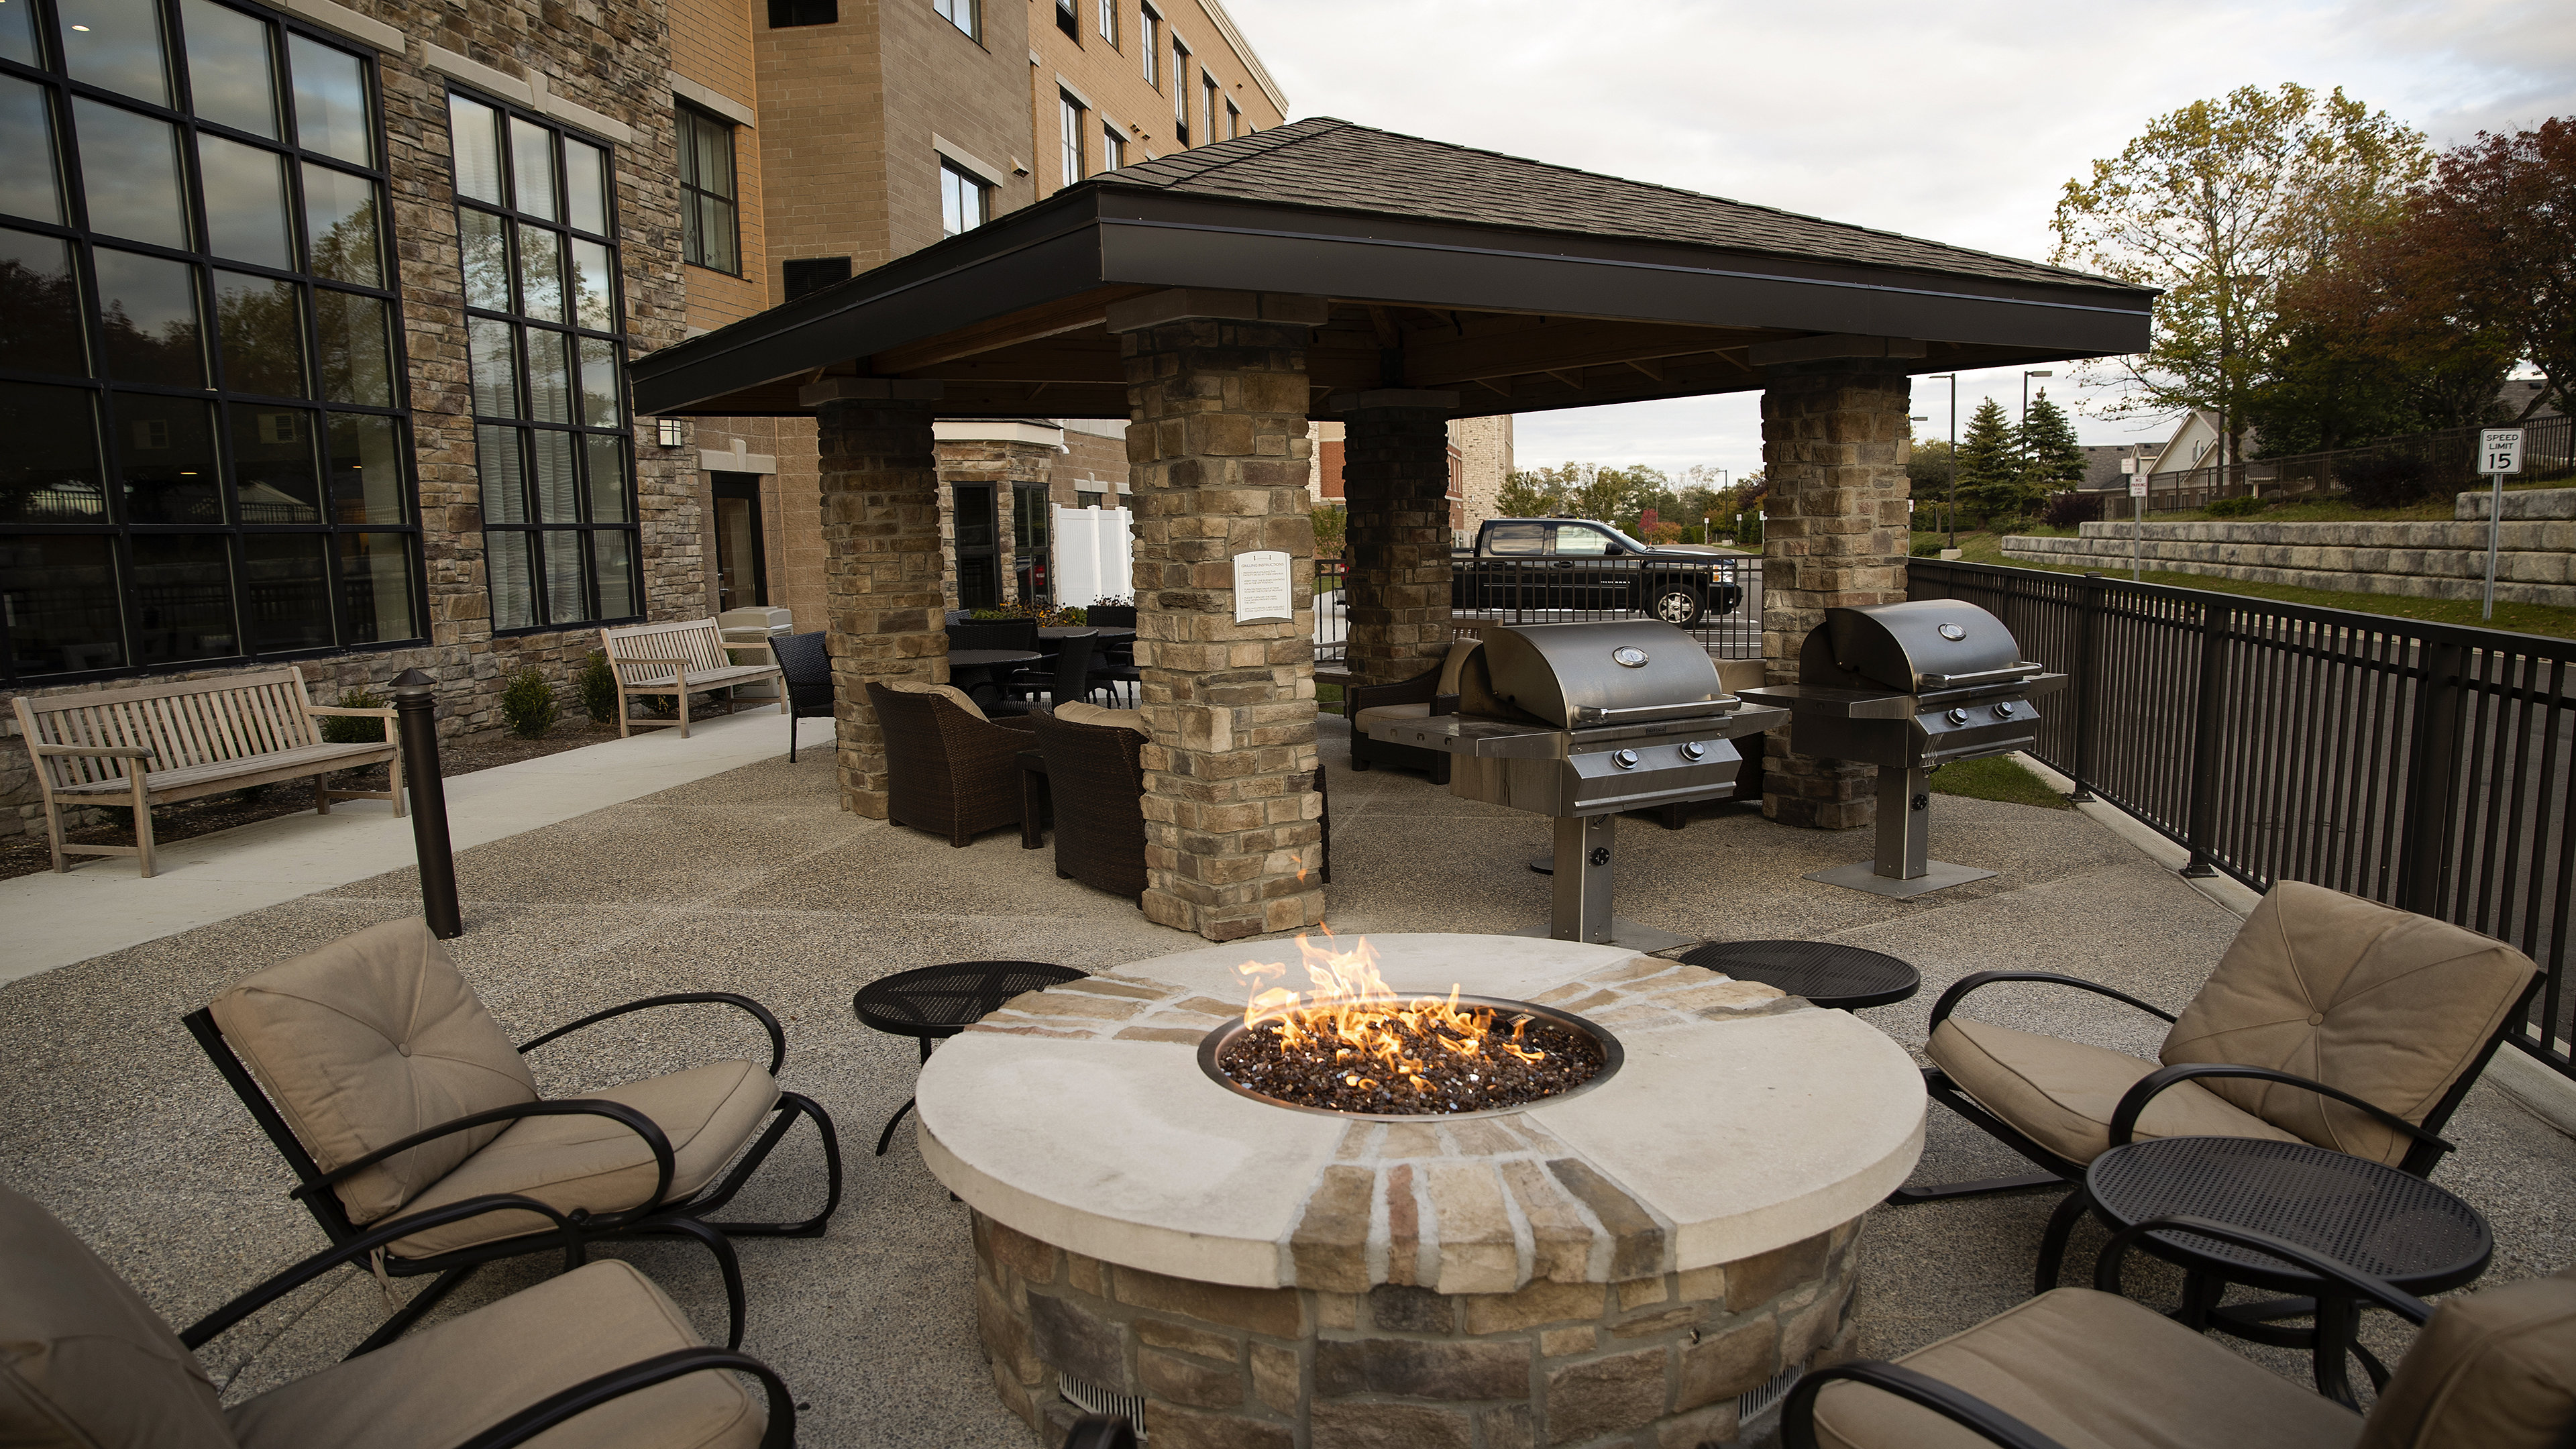 Enjoy the warm fire while cooking outside on one of our BBQ grills